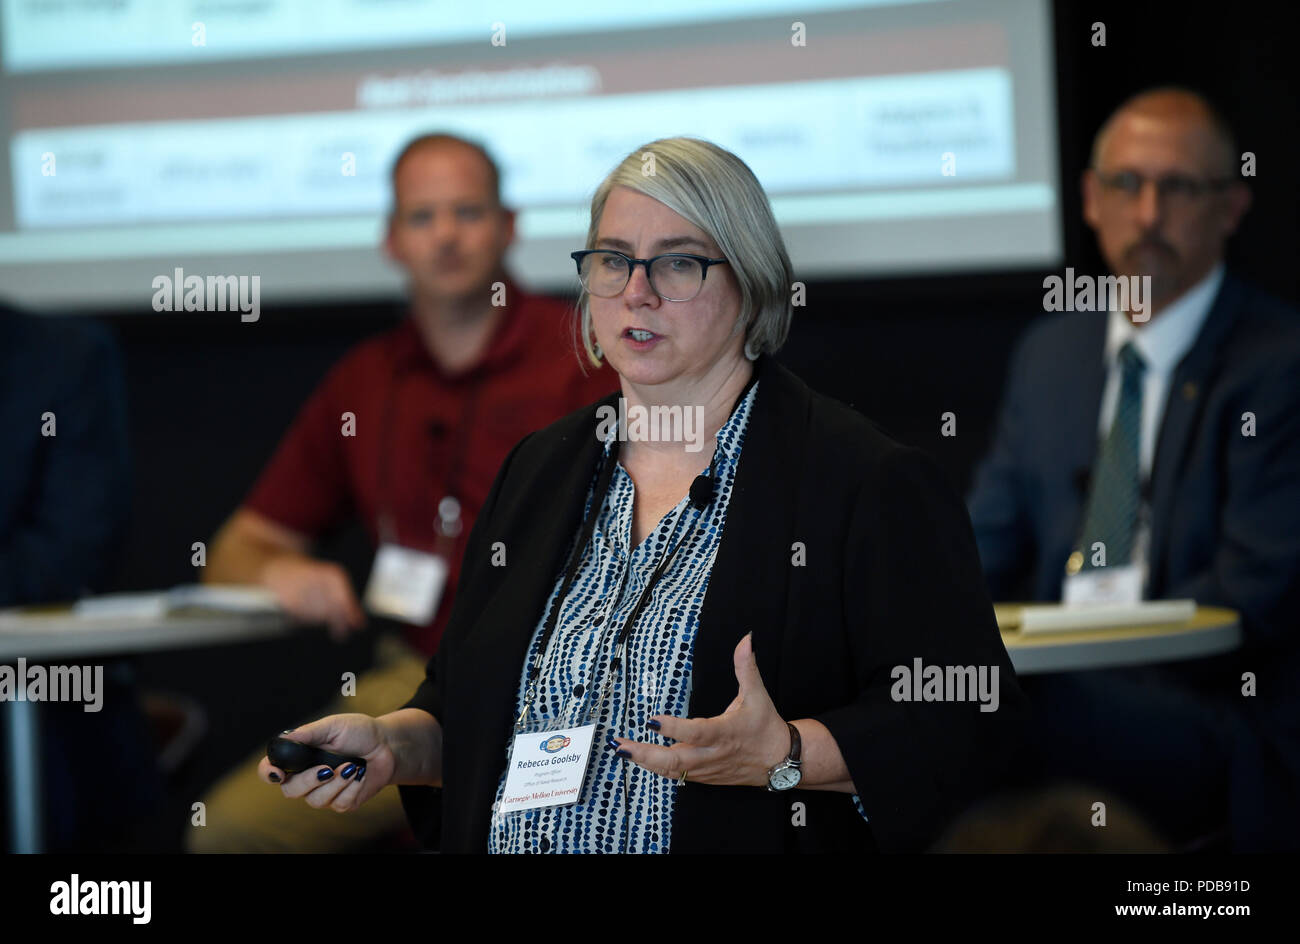 180802-N-PO203-0388 PITTSBURGH, Pa. (Aug. 2, 2018) Dr. Rebecca Goolsby, program officer, Office of Naval Research (ONR), participates in a panel discussion on restoration of essential services during the Artificial Intelligence (AI) & Autonomy for Humanitarian Assistance and Disaster Relief (HADR) workshop, co-hosted by ONR and Carnegie Mellon University. The workshop brings together a community of academia, industry, and government stakeholders with a diverse pool of first responders in order to accelerate the experimentation, fielding, and scaling of new AI and autonomous capabilities in sup Stock Photo